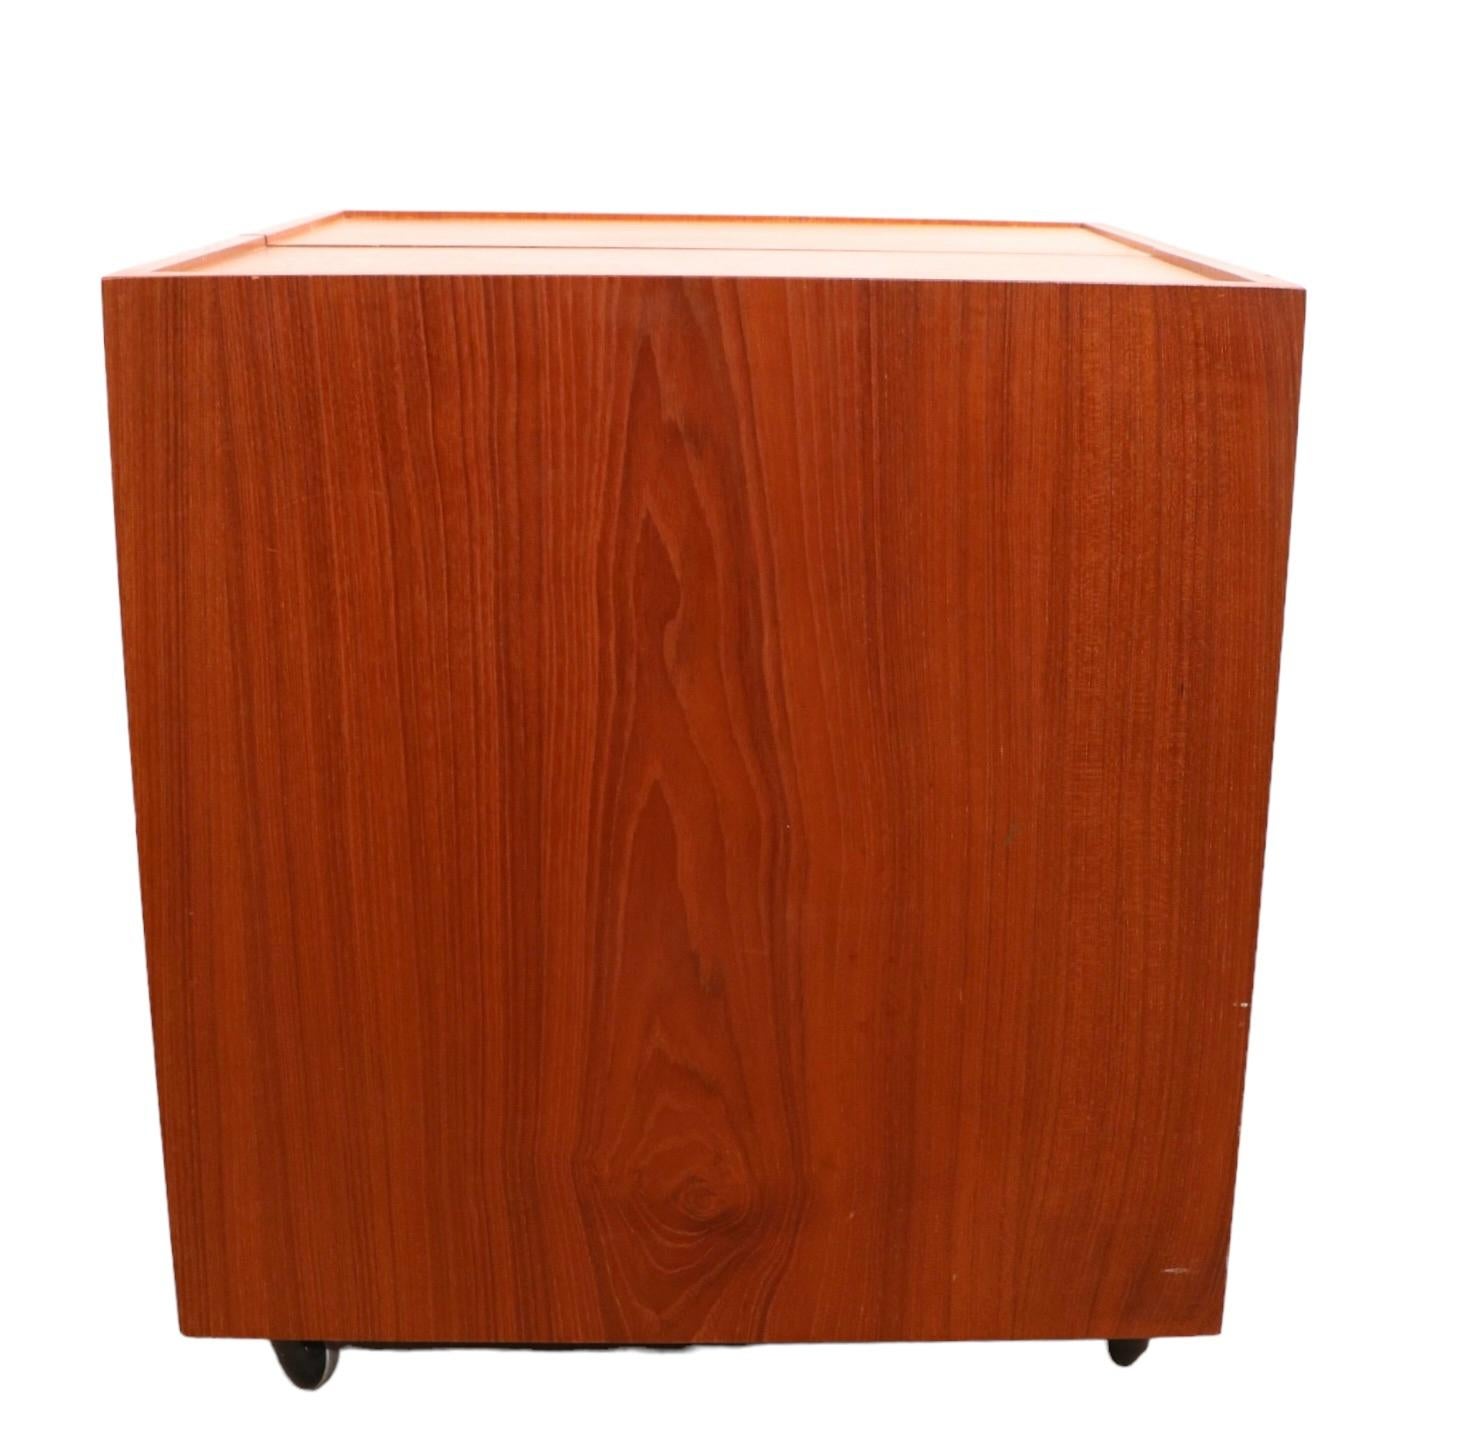 Chic collapsible cabinet bar designed by Erik Buch for Dyrlund, made in Denmark circa 1960- 1970's. Te cabinet feature twosomes, which open to storage, and pullout work surfaces. The interior surfaces have a laminate covering to make clean up